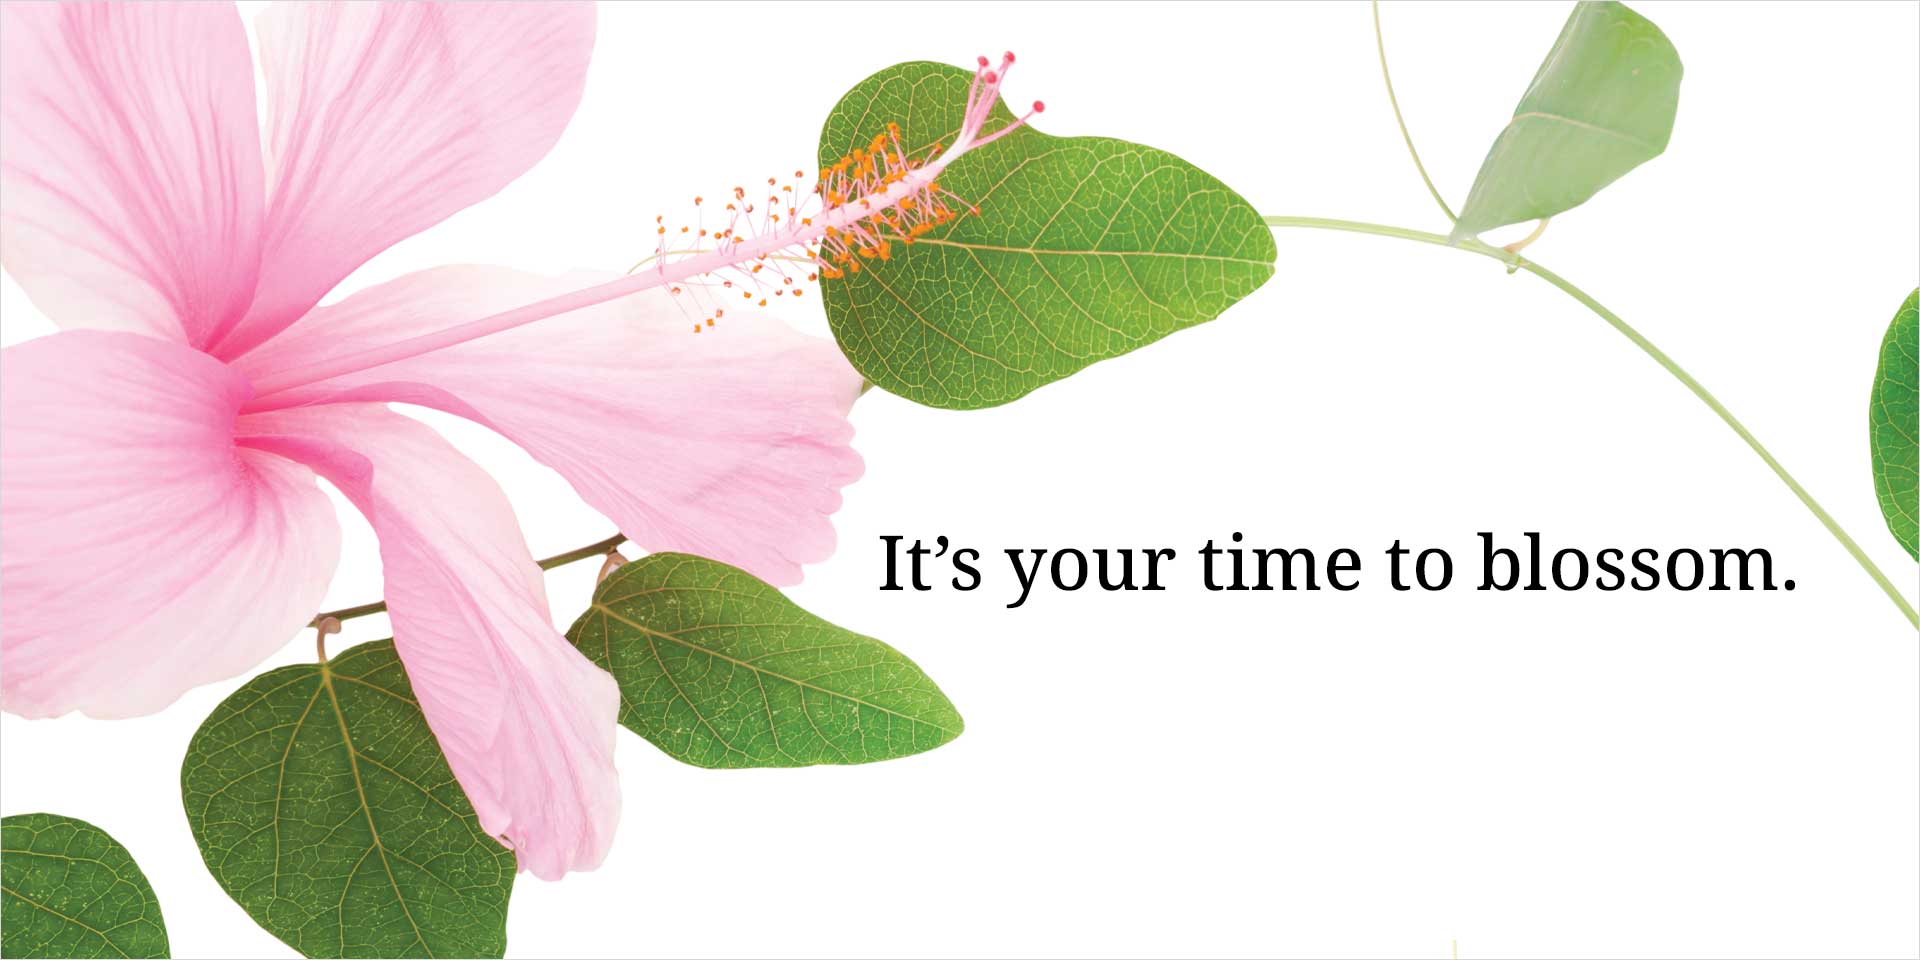 It's your time to blossom.